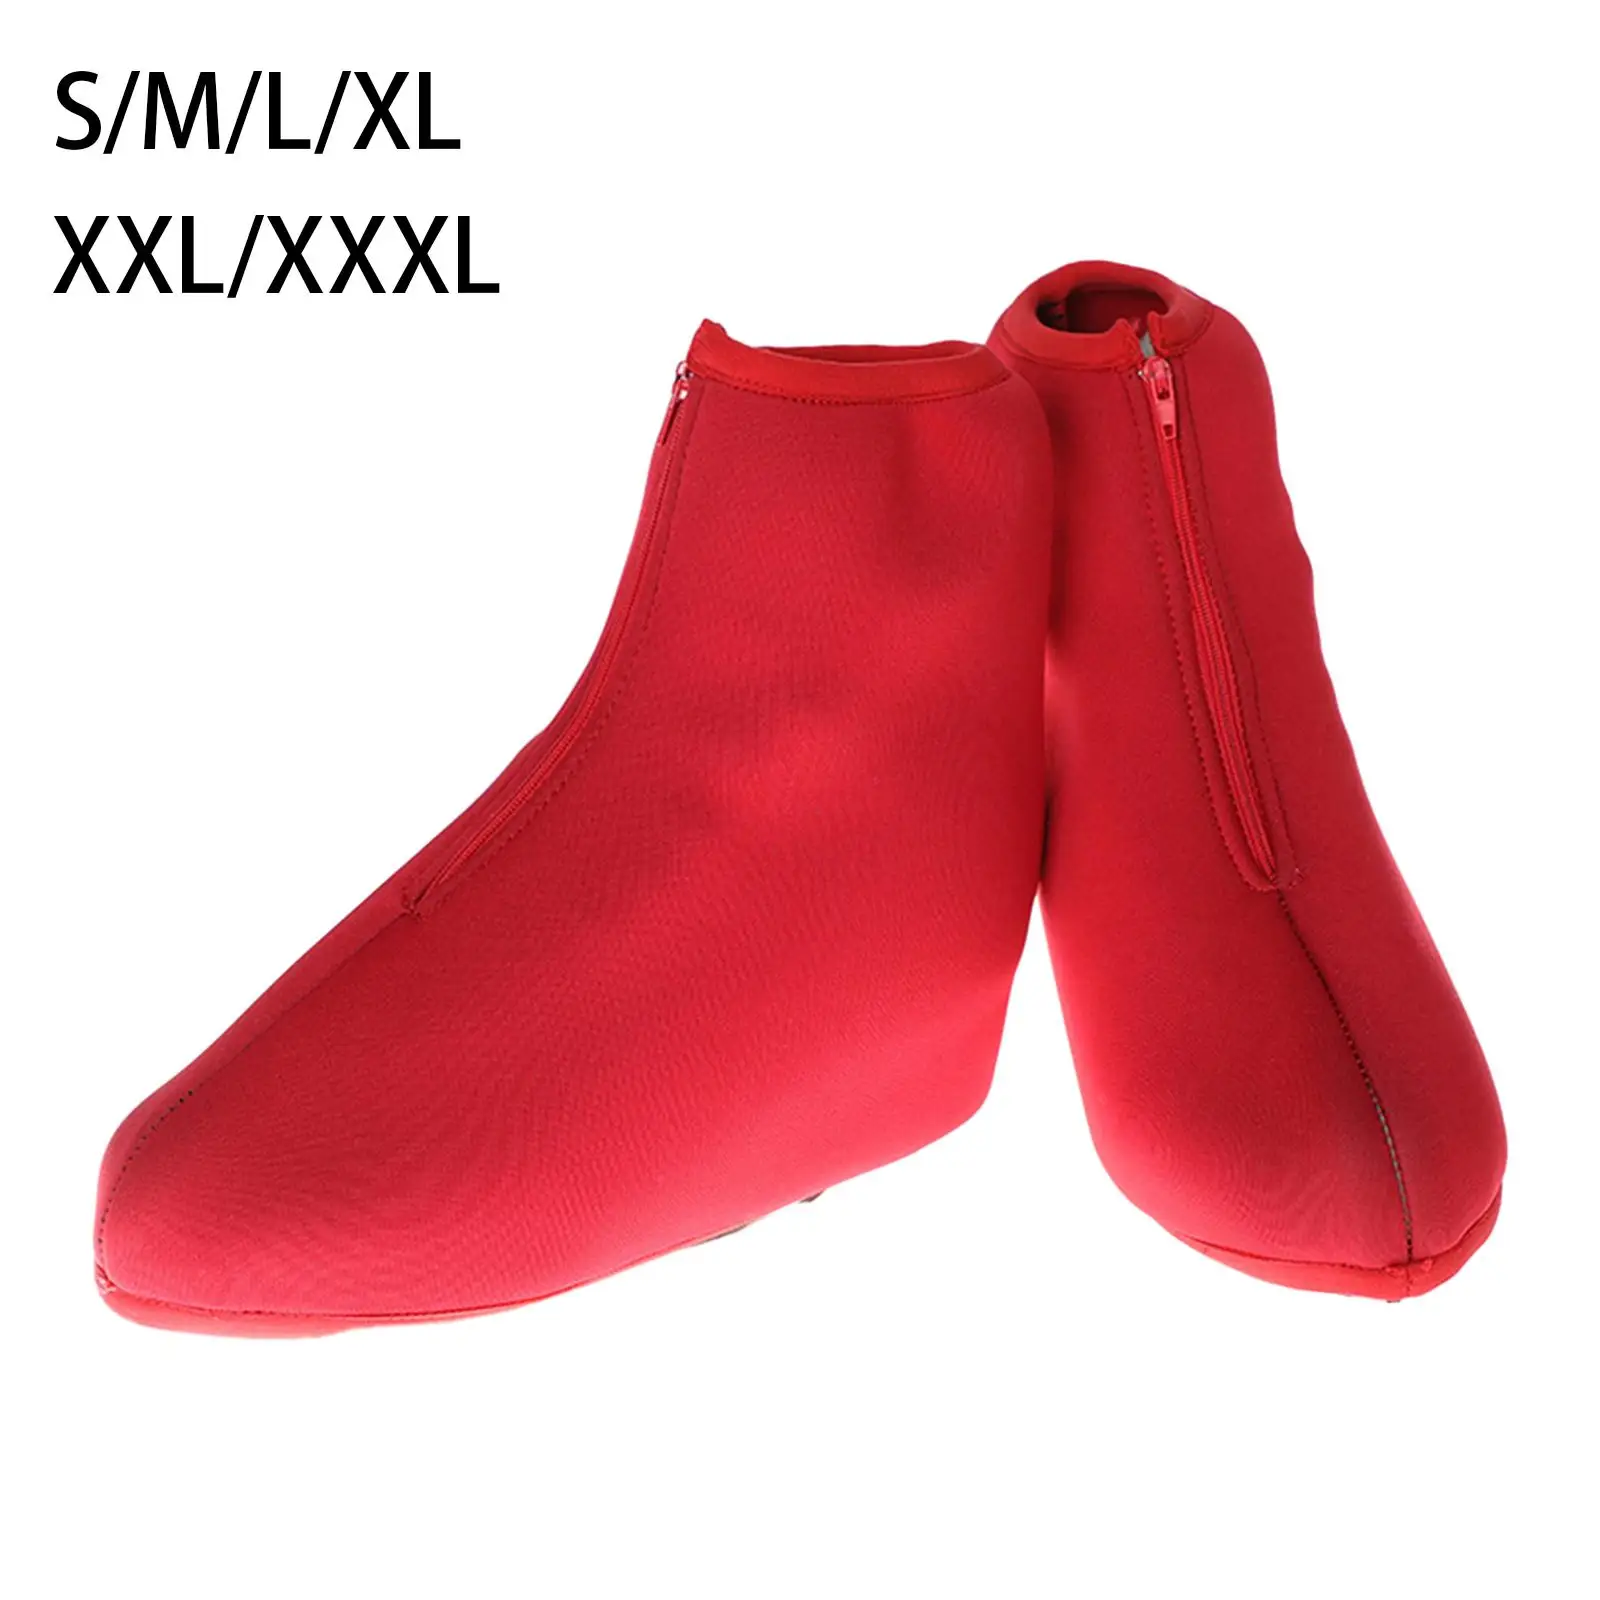 1 Pair Ice Skate Boot Covers Shoes Protector Sports Accessories Men Women Protective for Figure Skates Ice Skating Roller Skates